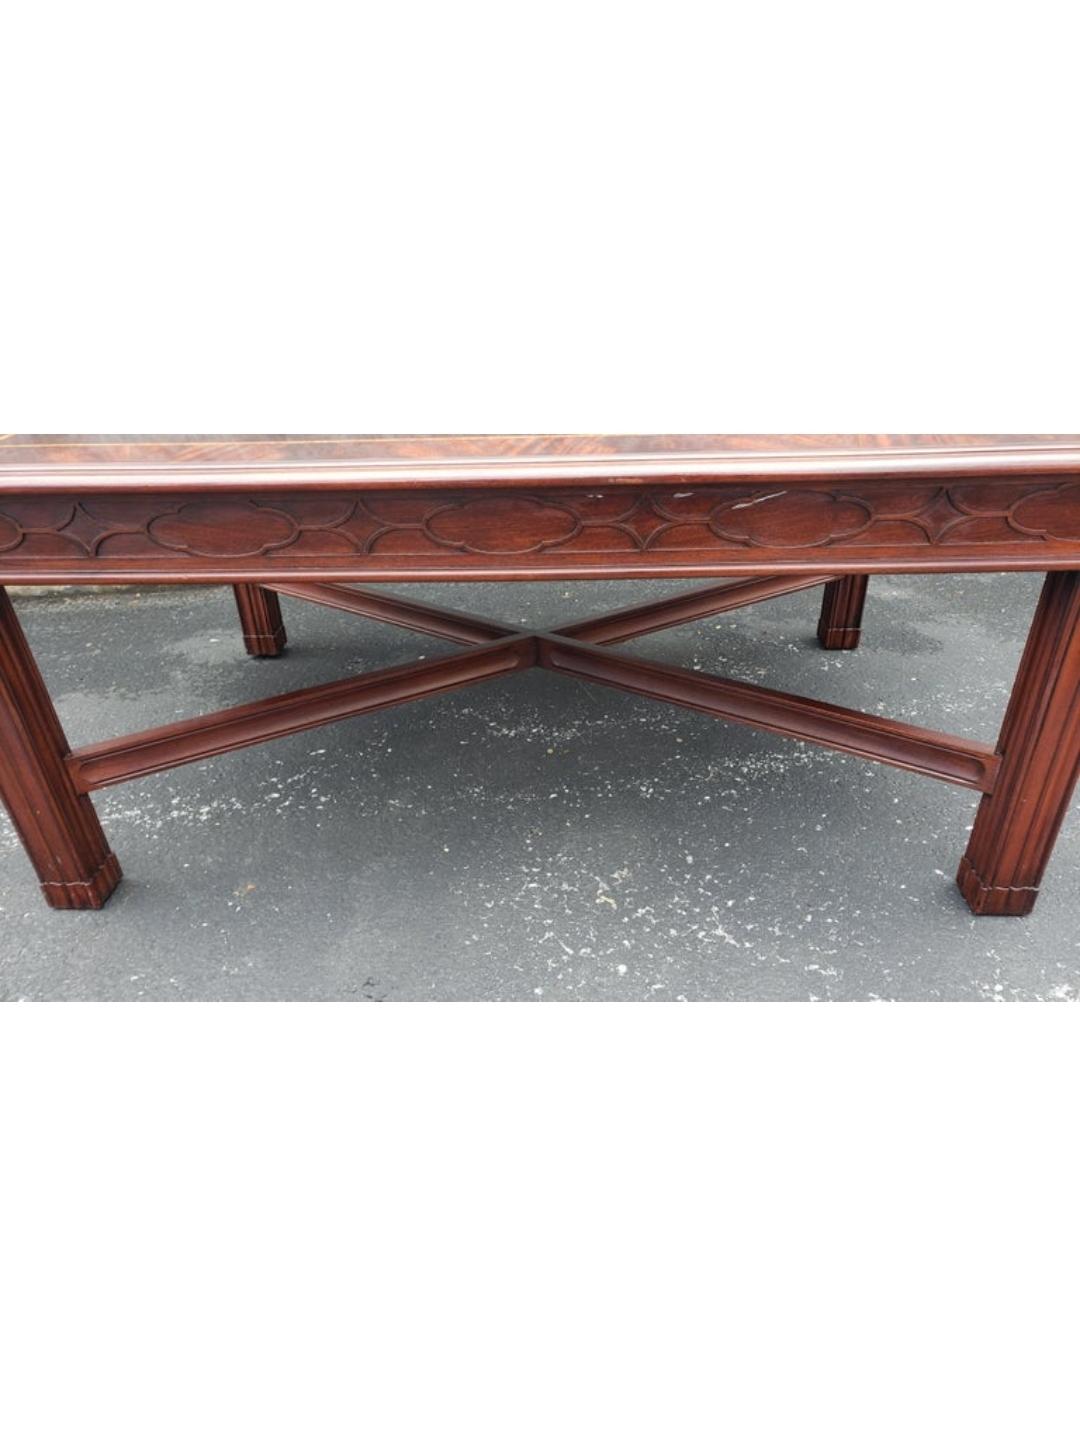 Henkel Harris Chippendale Mahogany and Tulipwood Inlay Coffee Table w/ Fretwork For Sale 3